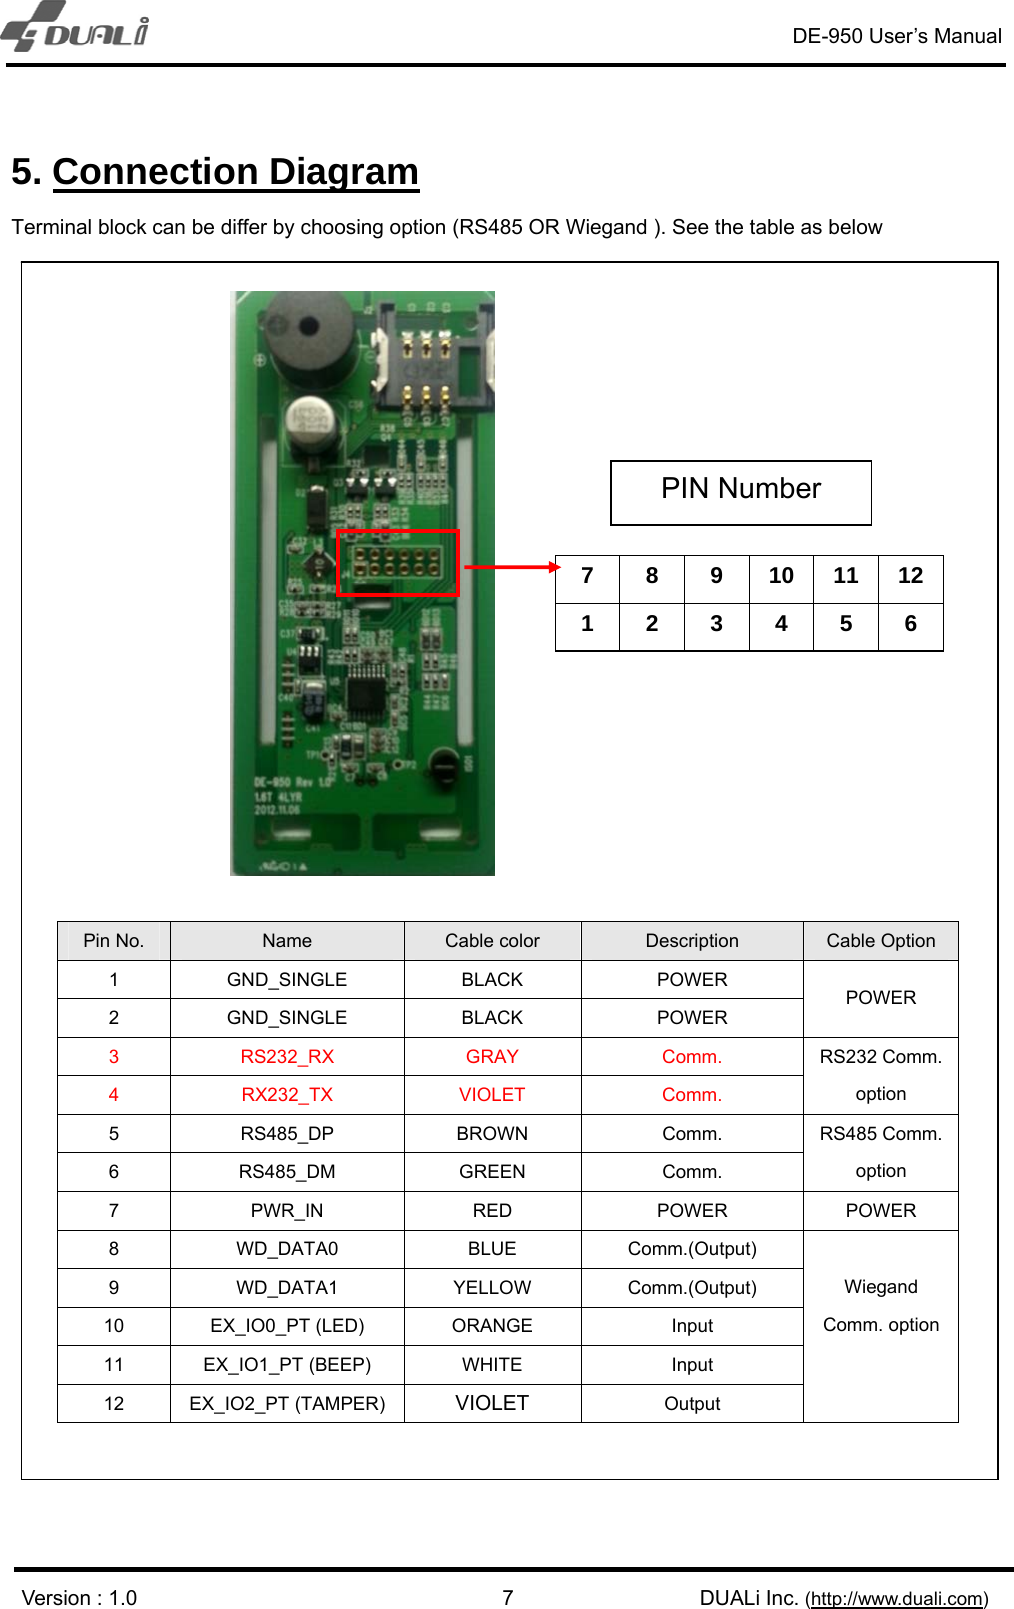 DE-950 User’s Manual   Version : 1.0                                             DUALi Inc. (http://www.duali.com) 75. Connection Diagram Terminal block can be differ by choosing option (RS485 OR Wiegand ). See the table as below    Pin No.  Name  Cable color  Description  Cable Option 1 GND_SINGLE  BLACK  POWER 2 GND_SINGLE  BLACK  POWER POWER 3 RS232_RX  GRAY  Comm. 4 RX232_TX  VIOLET  Comm. RS232 Comm. option 5 RS485_DP BROWN  Comm. 6 RS485_DM  GREEN  Comm. RS485 Comm. option 7 PWR_IN  RED  POWER POWER 8 WD_DATA0  BLUE Comm.(Output) 9 WD_DATA1 YELLOW Comm.(Output) 10 EX_IO0_PT (LED) ORANGE  Input 11 EX_IO1_PT (BEEP)  WHITE  Input 12 EX_IO2_PT (TAMPER)  VIOLET Output  Wiegand Comm. option  7 8 9 10 11 12 1 2 3 4 5 6 PIN Number 